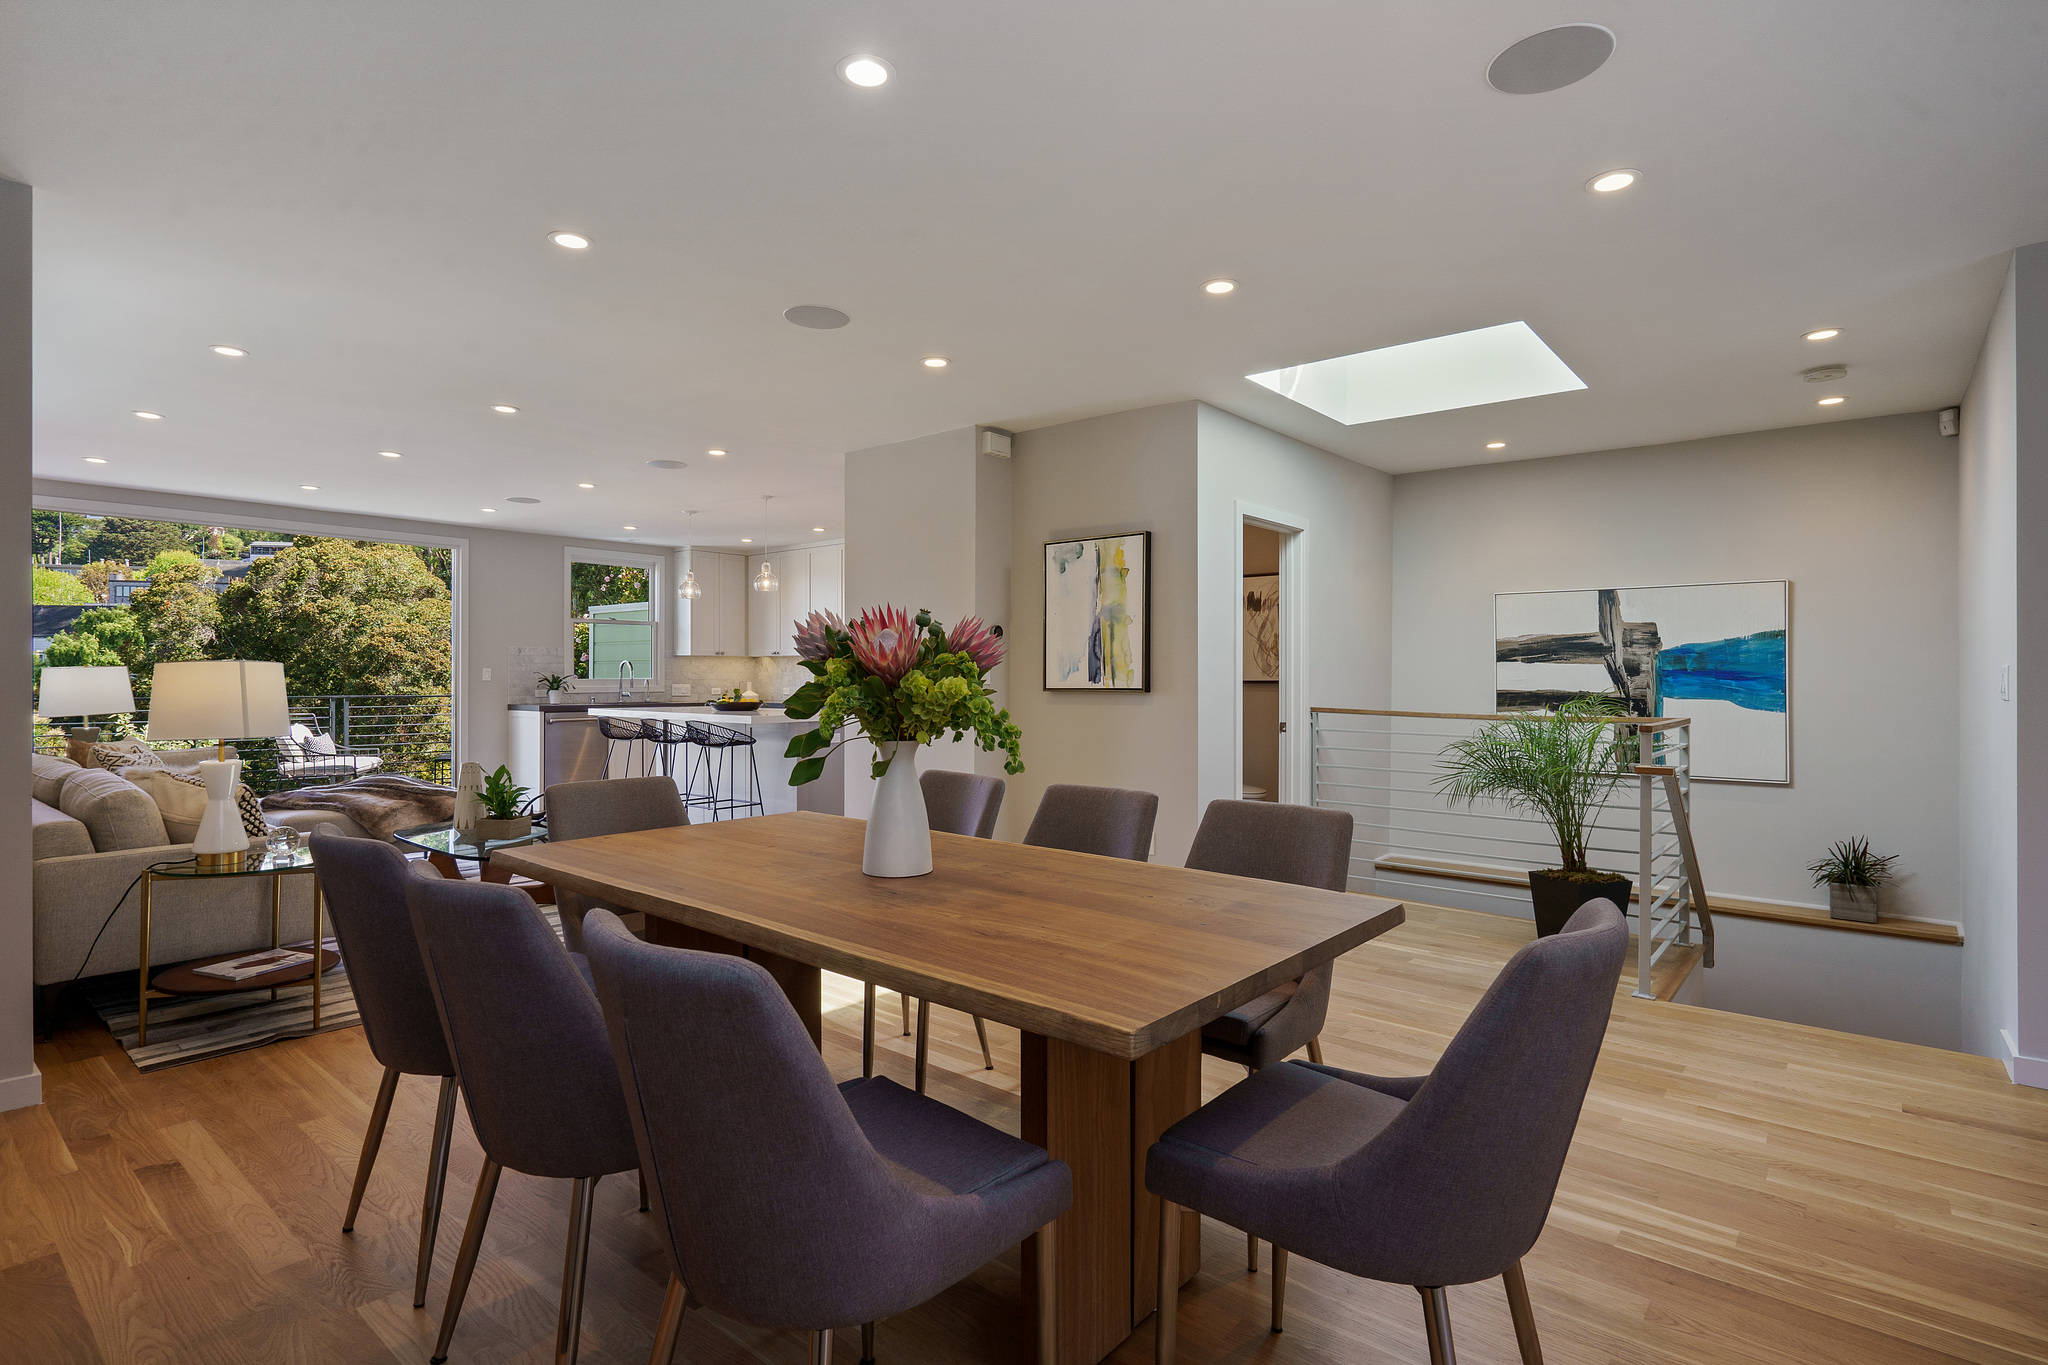 Property Photo: Dining area, showing a skylight over stairs leading down